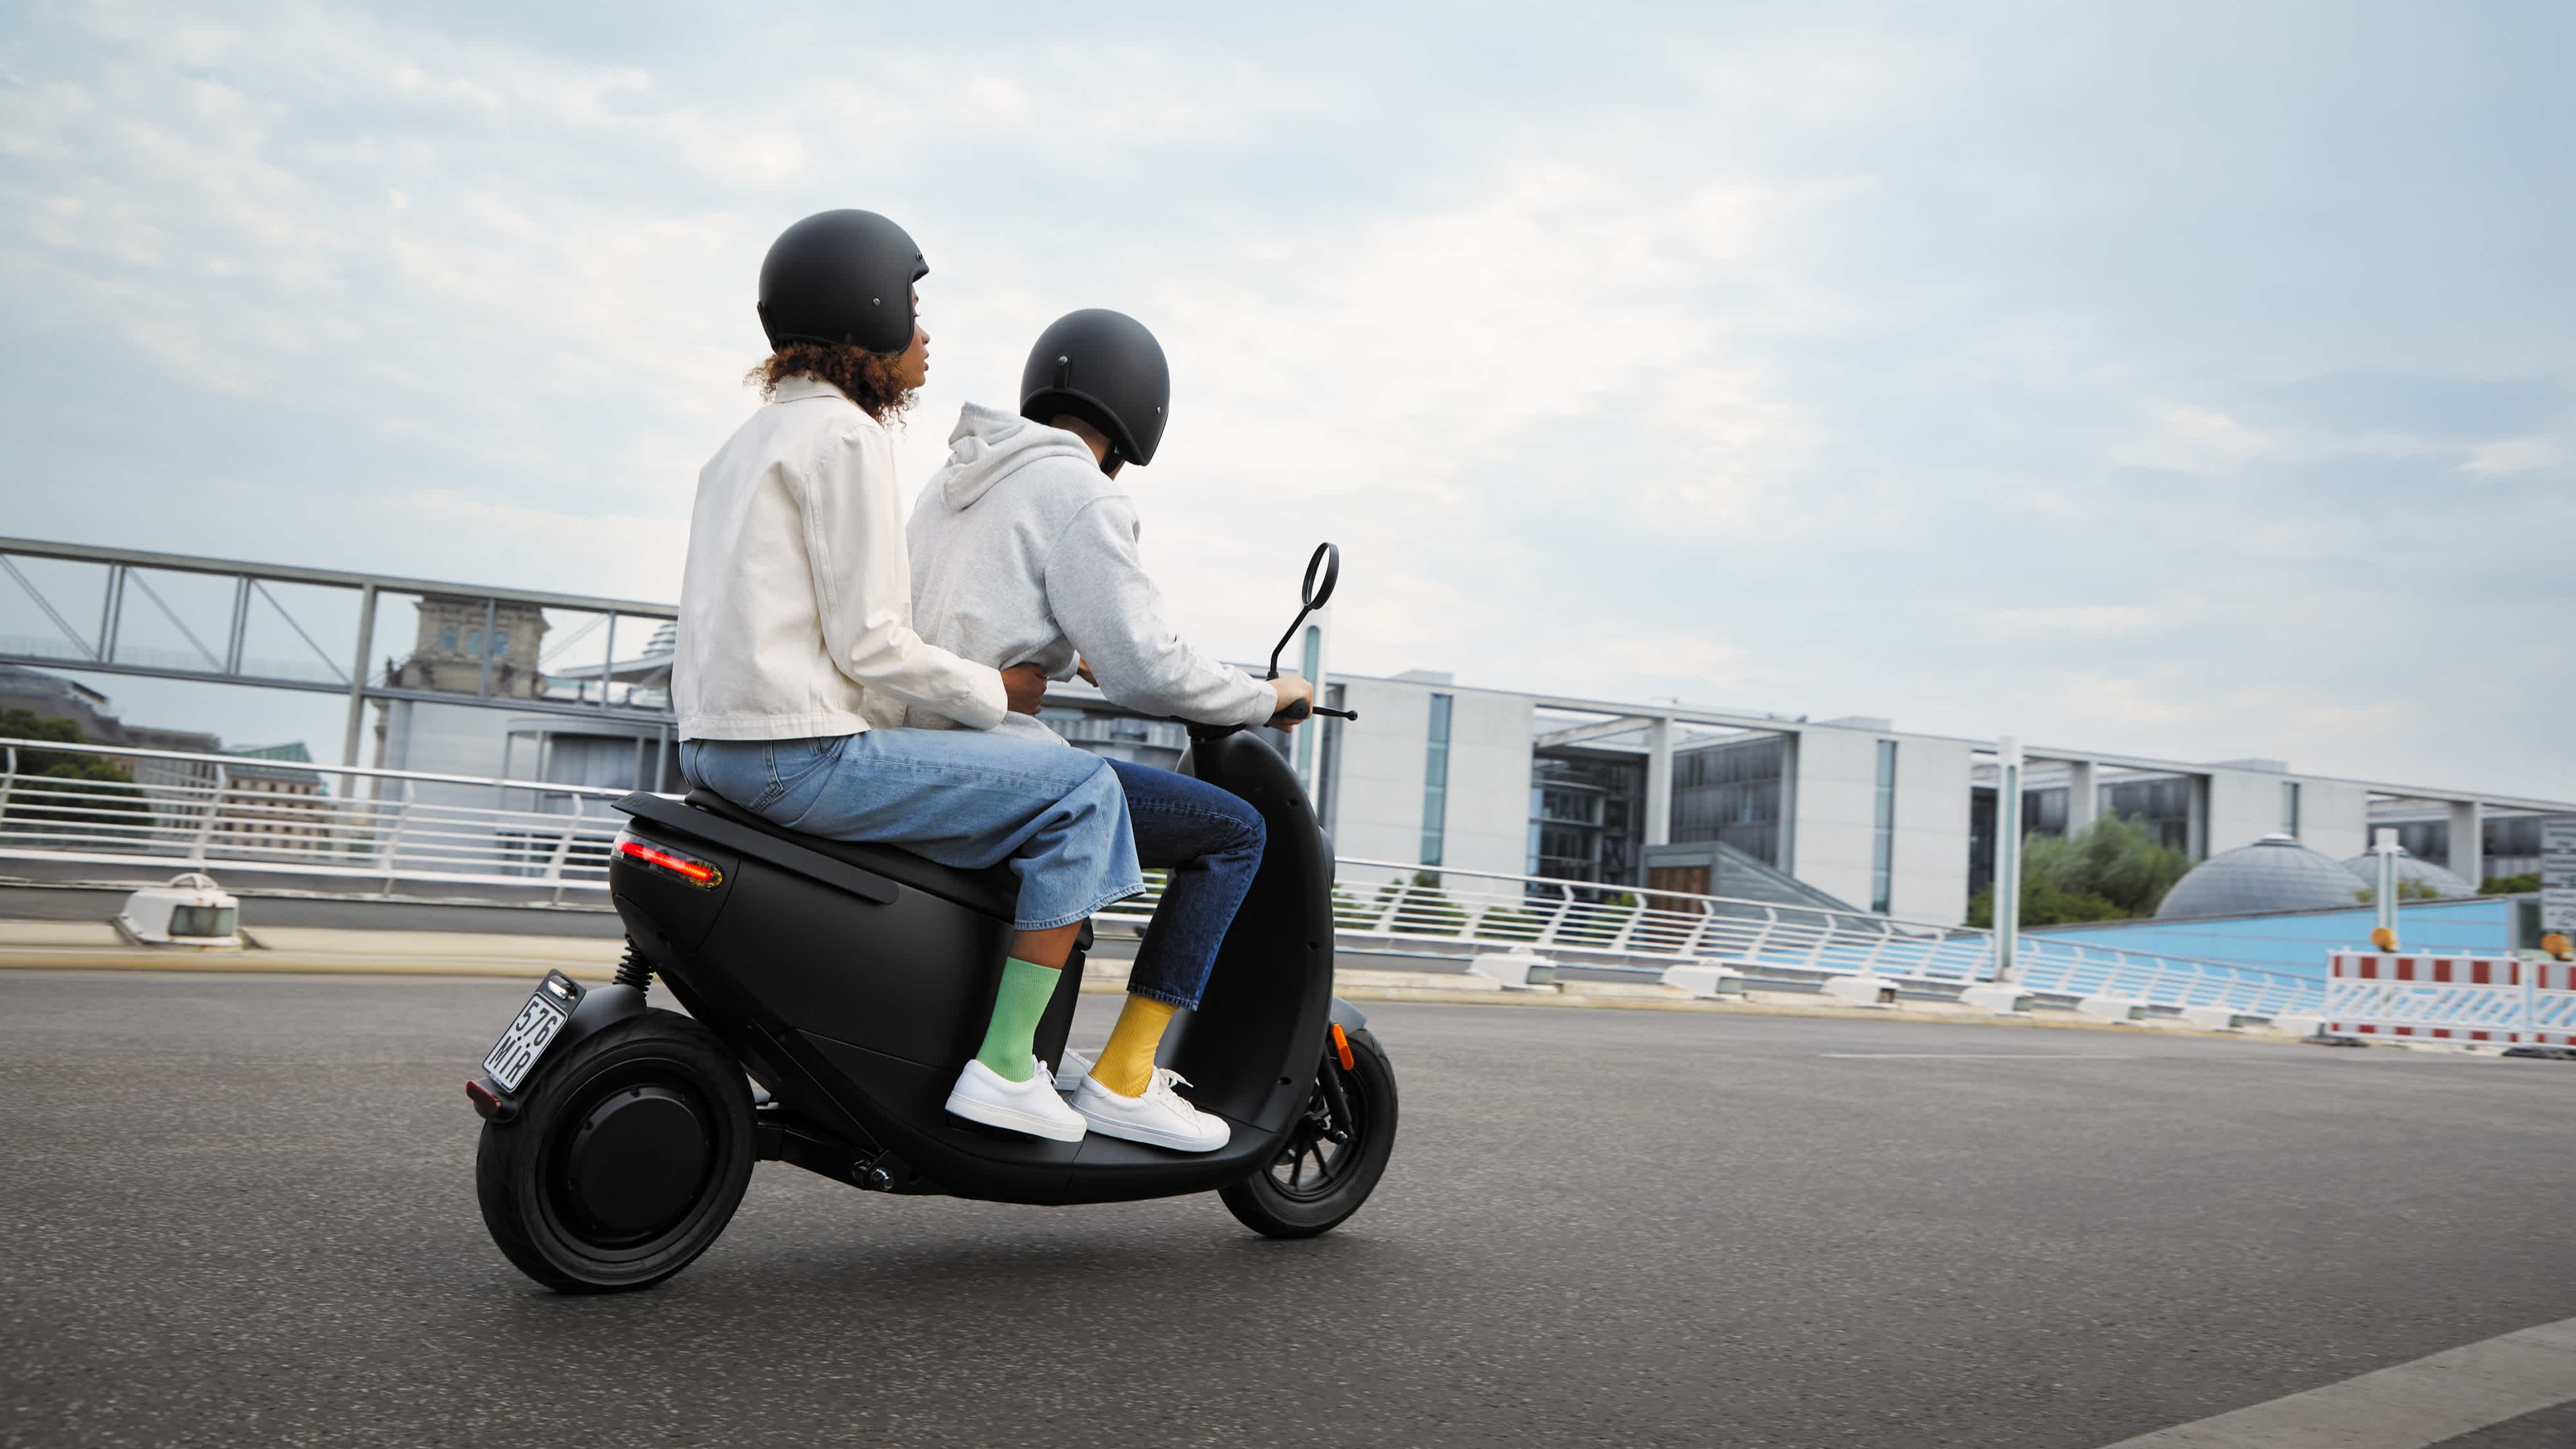 Two people on unu scooter